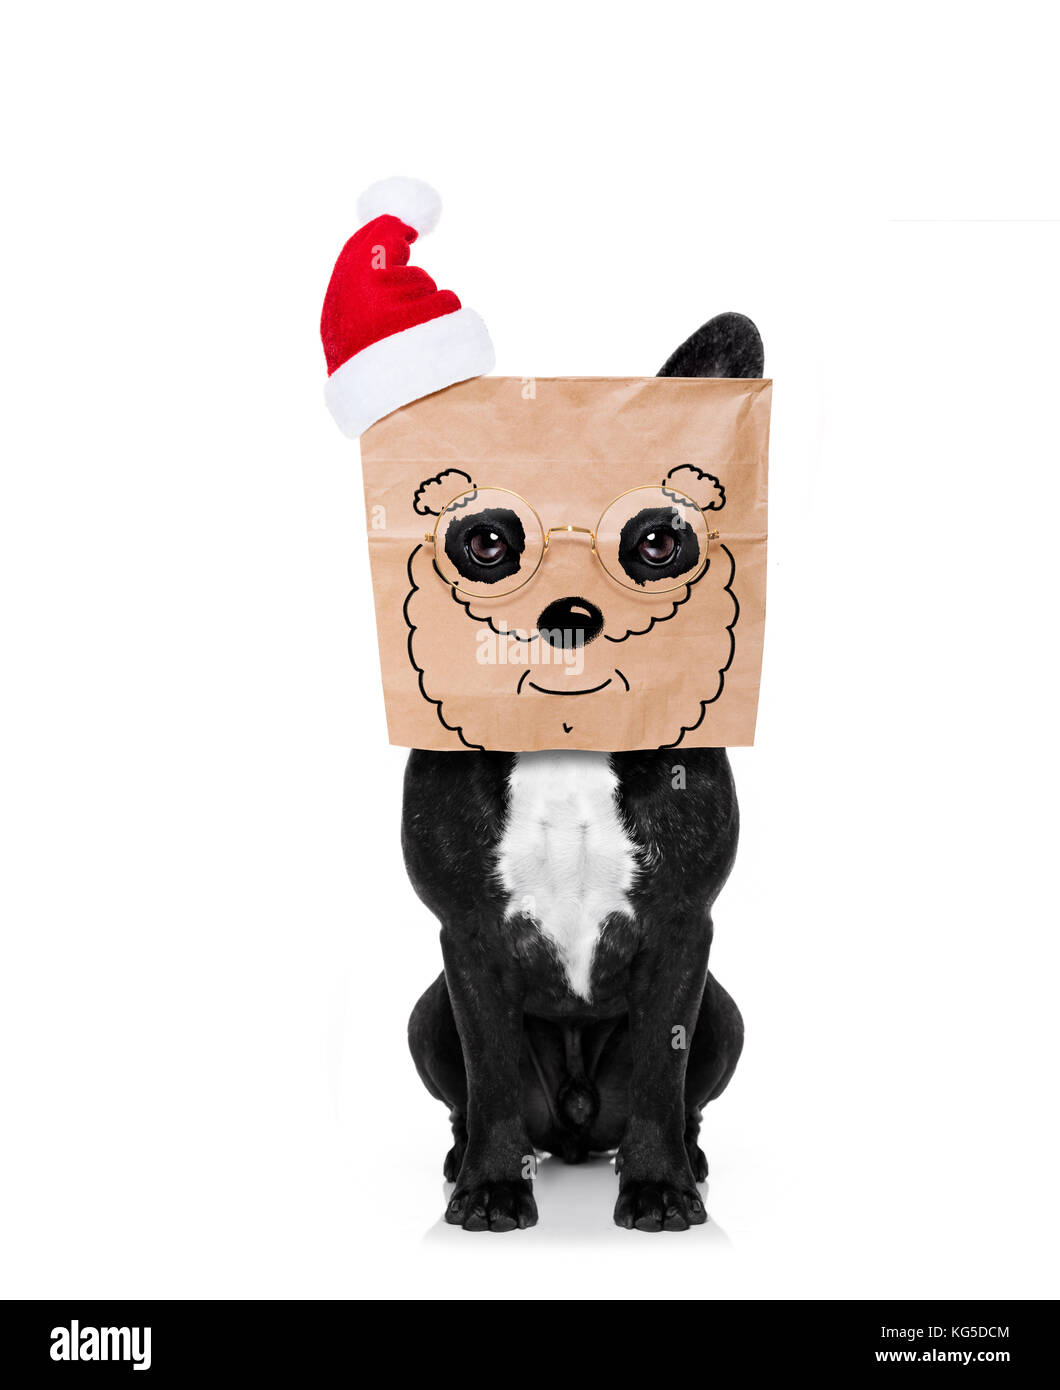 santa claus  dog  , hiding behind a paper bag on his head, isolated on white background, on christmas holidays, wearing a red hat Stock Photo